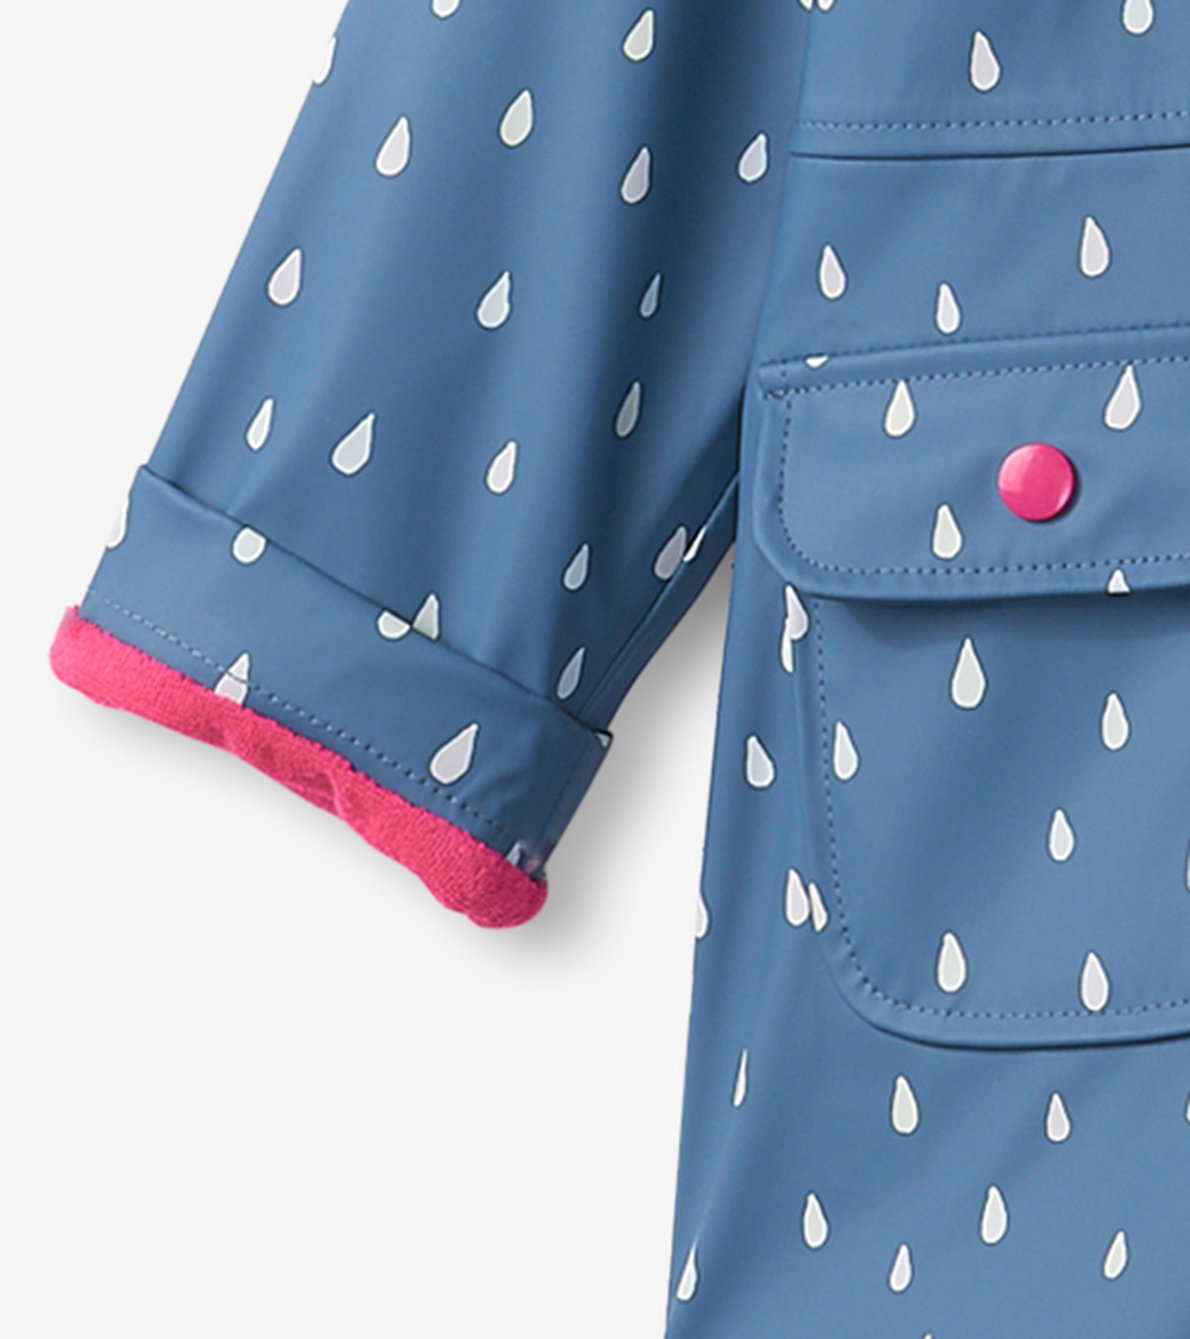 View larger image of Tiny Raindrops Colour Changing Kids Rain Jacket